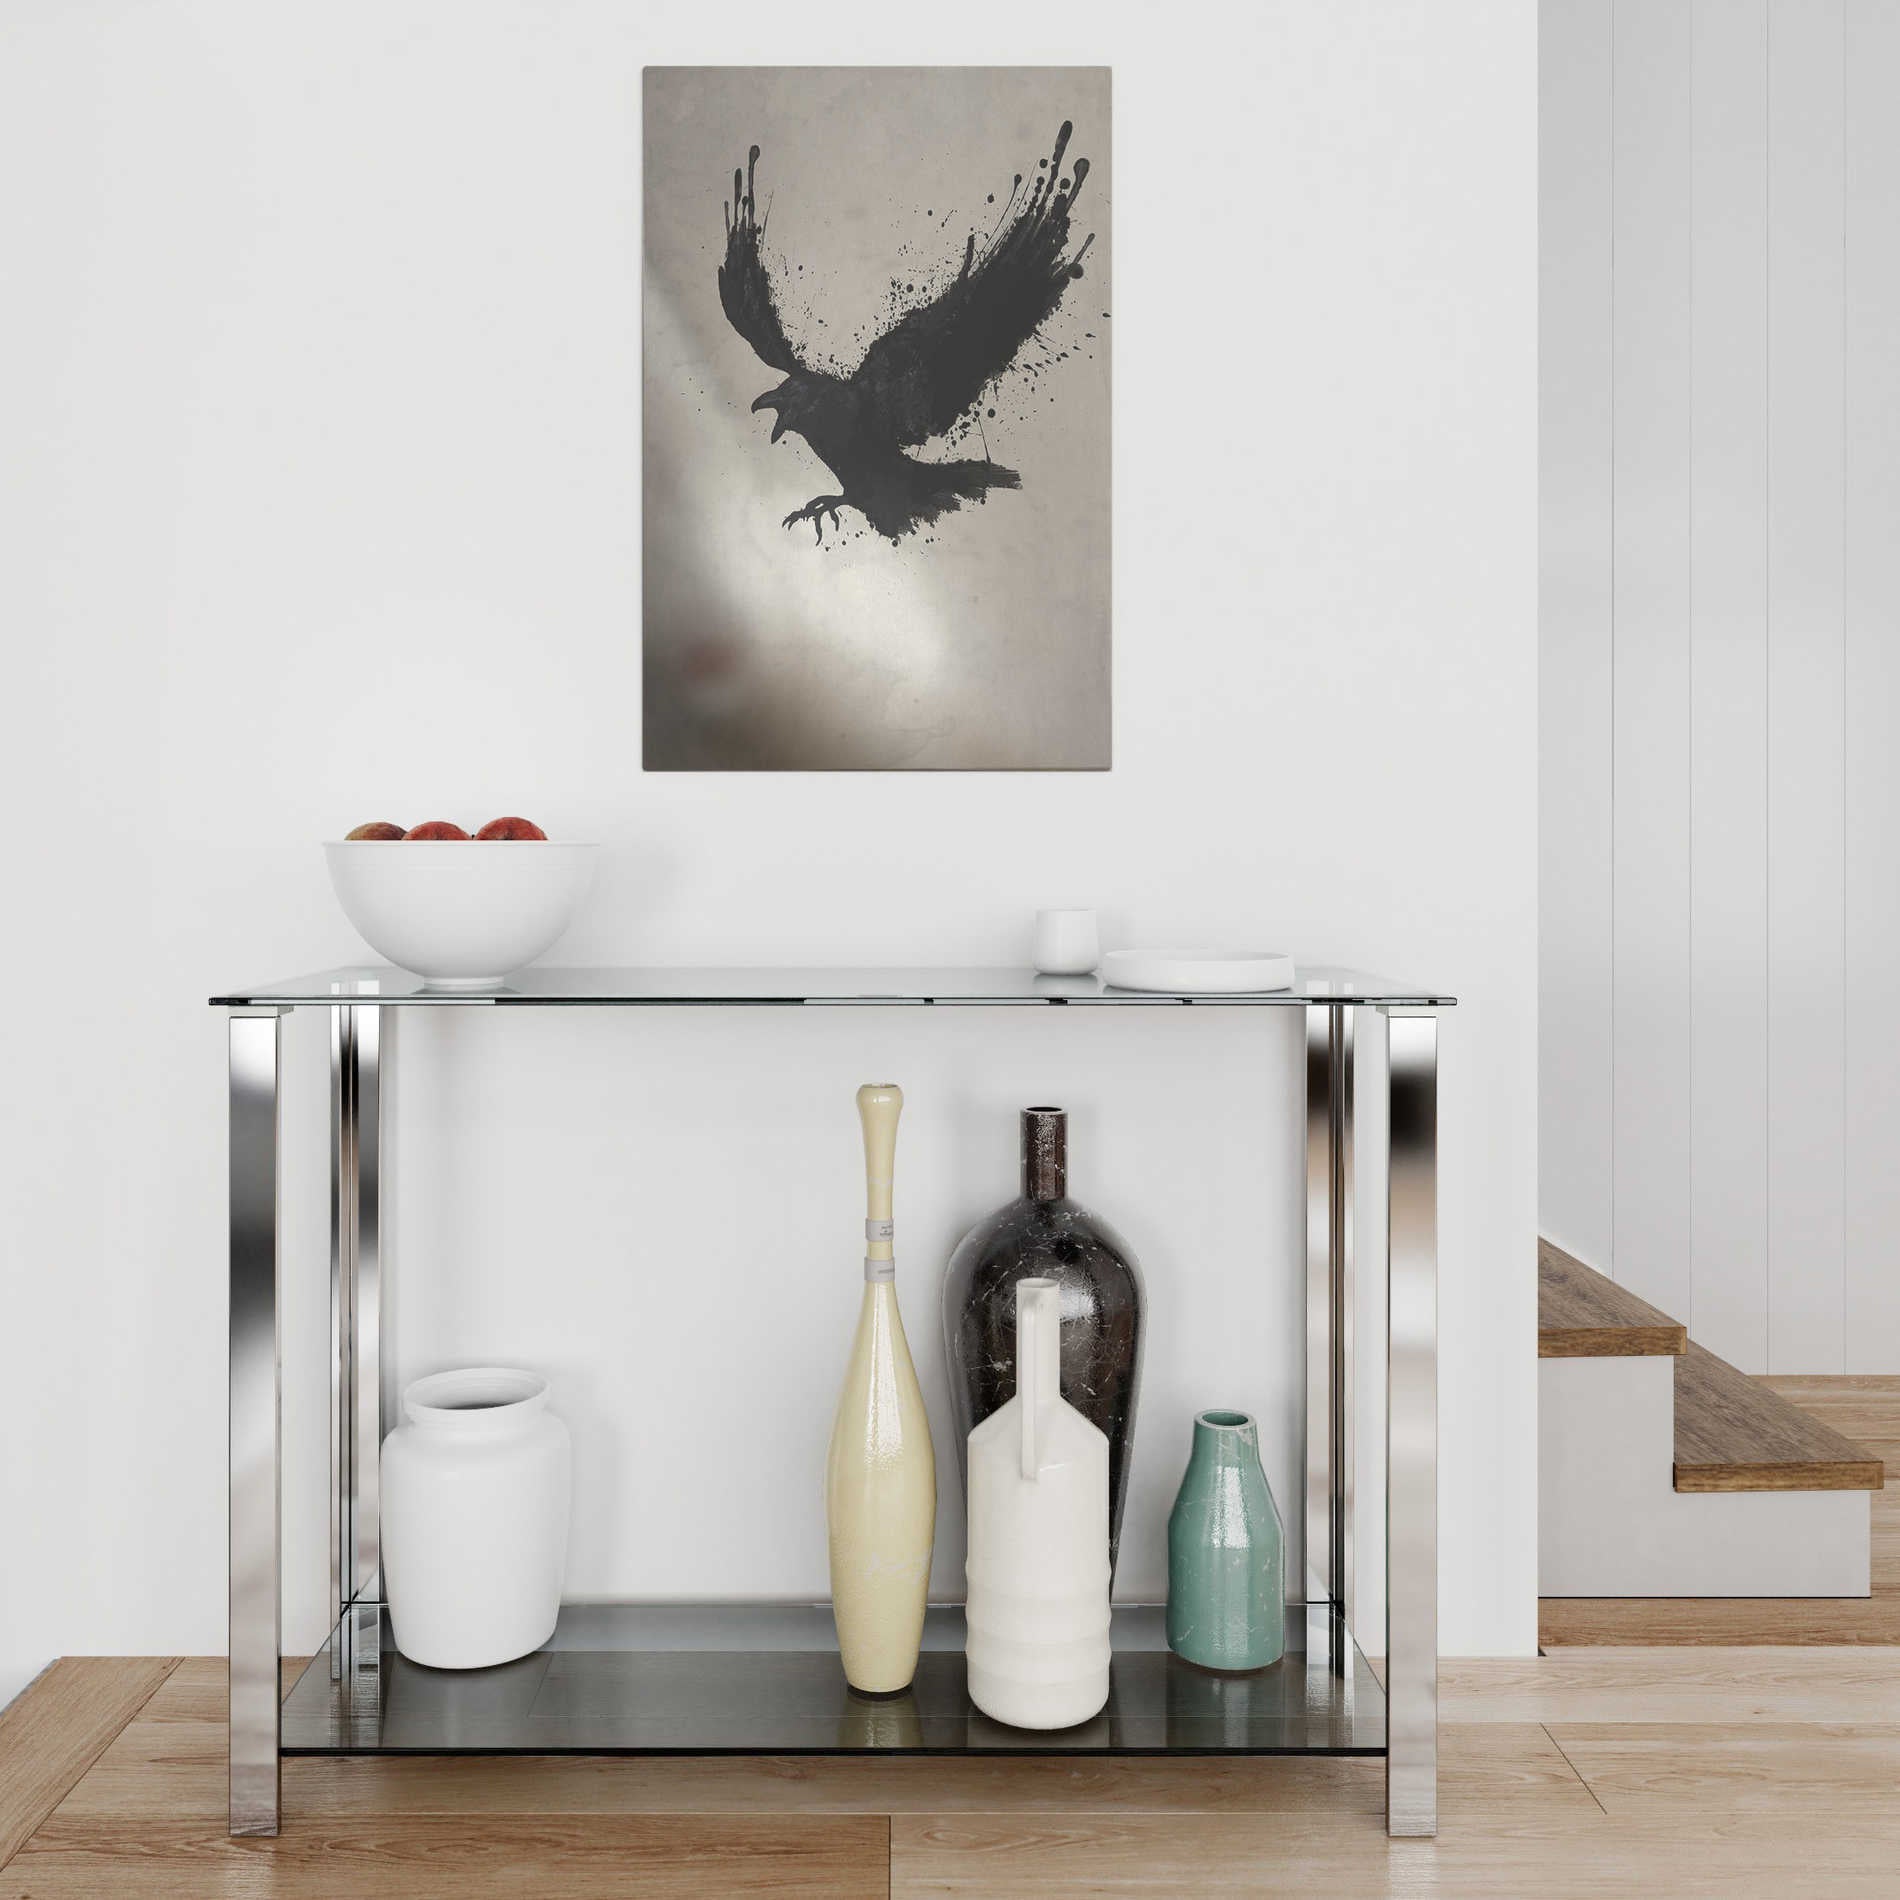 Epic Art "Raven" by Nicklas Gustafsson, on Brushed Aluminum,16 x 24